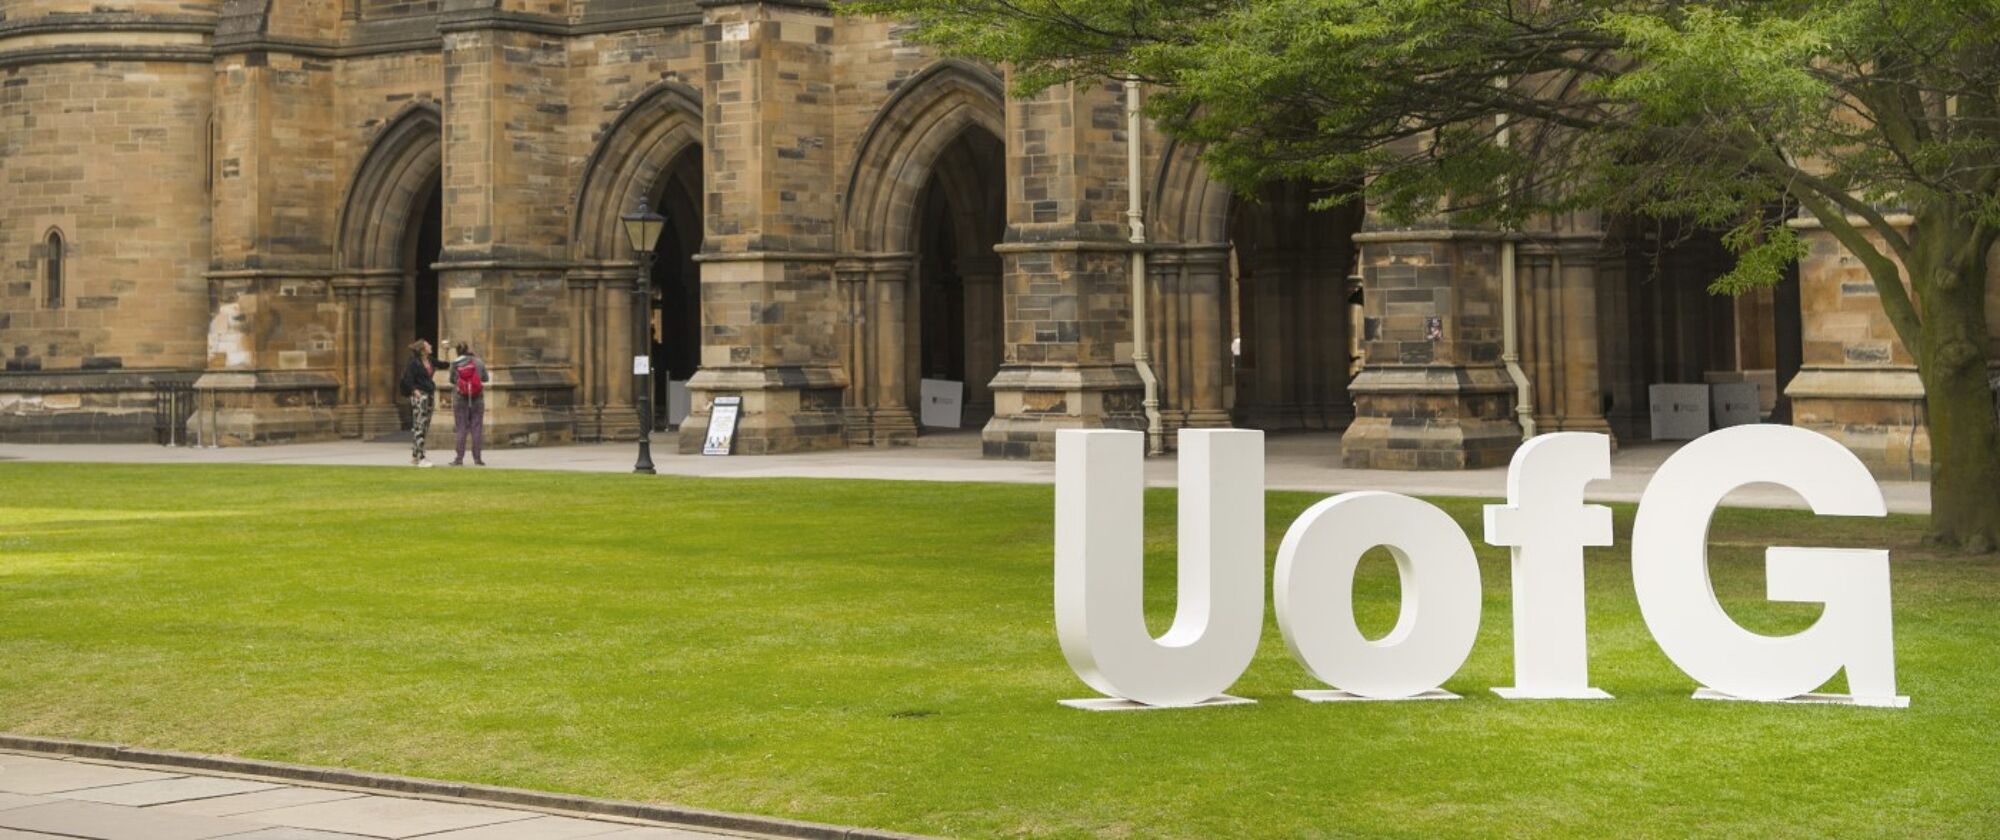 UofG letters in quad